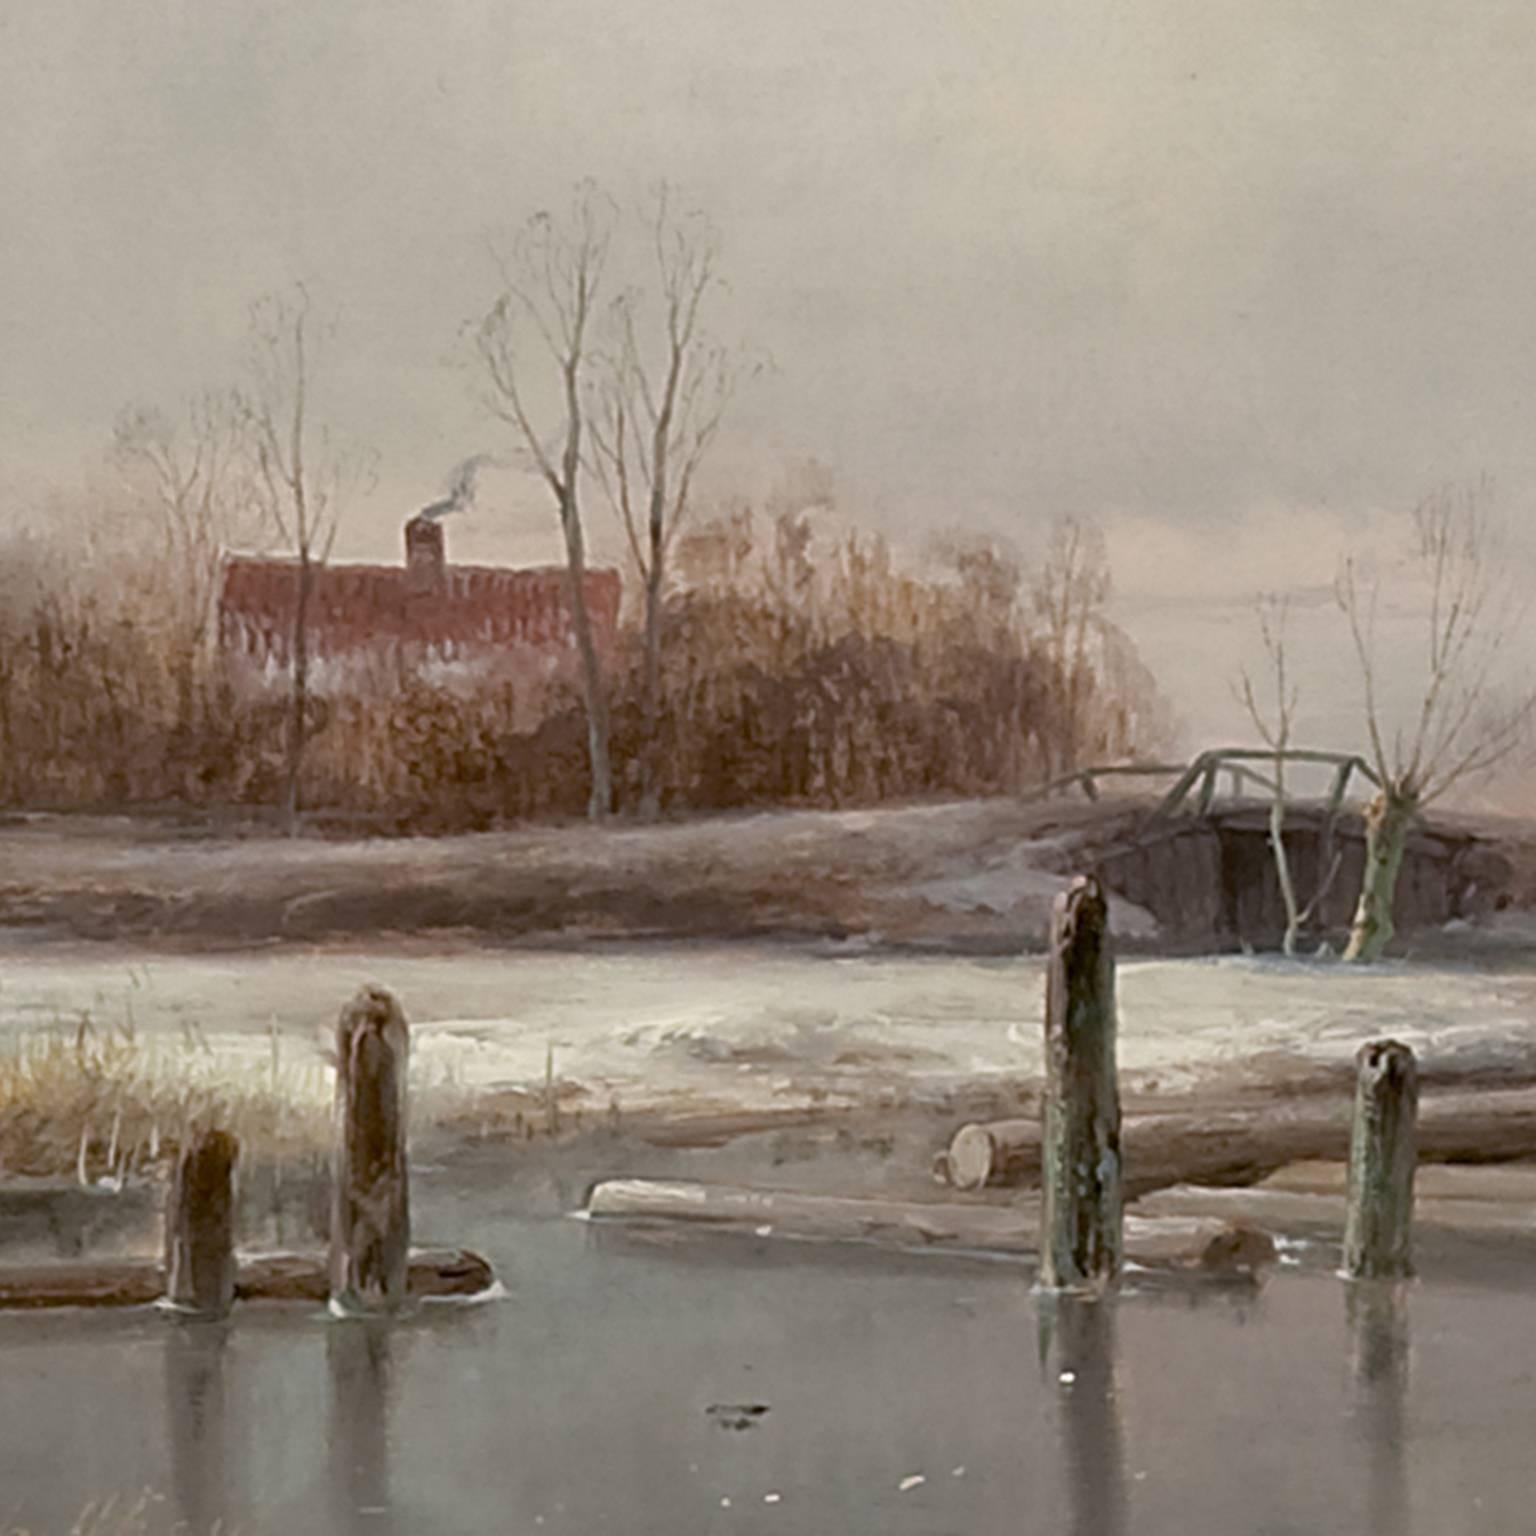 Frozen river with skaters and a koek and zopie - Black Landscape Painting by Andreas Schelfhout